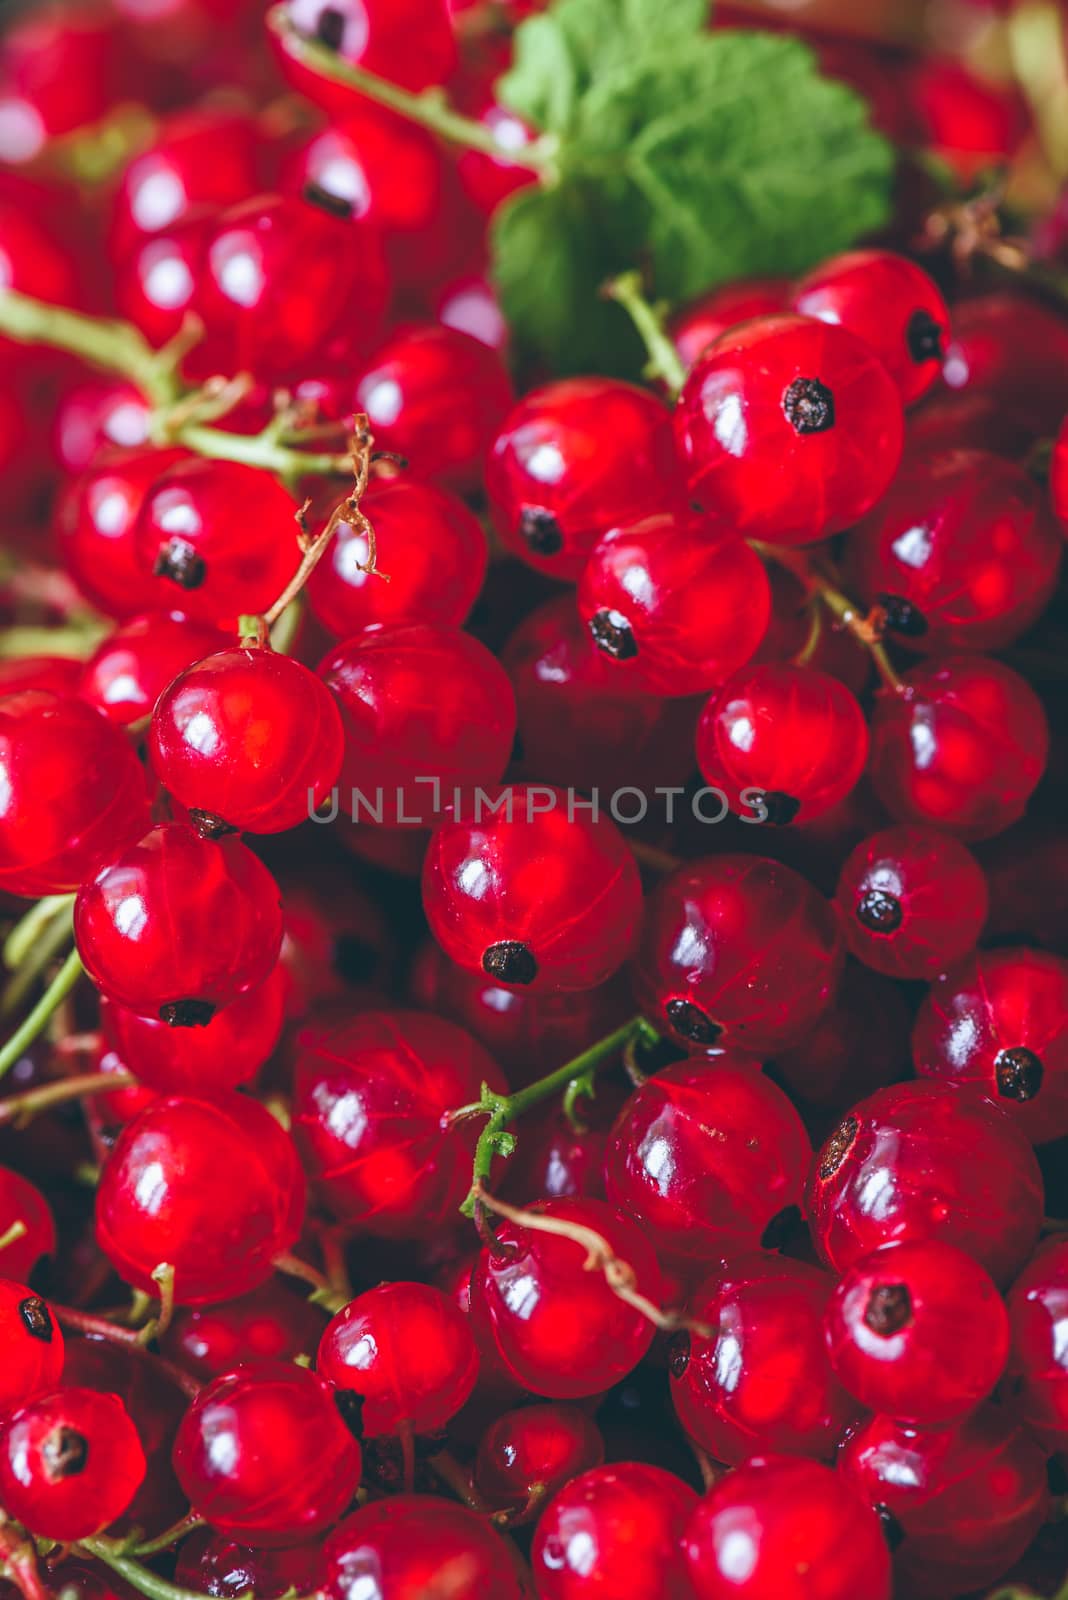 Background of Ripe and Juicy Red Currant.